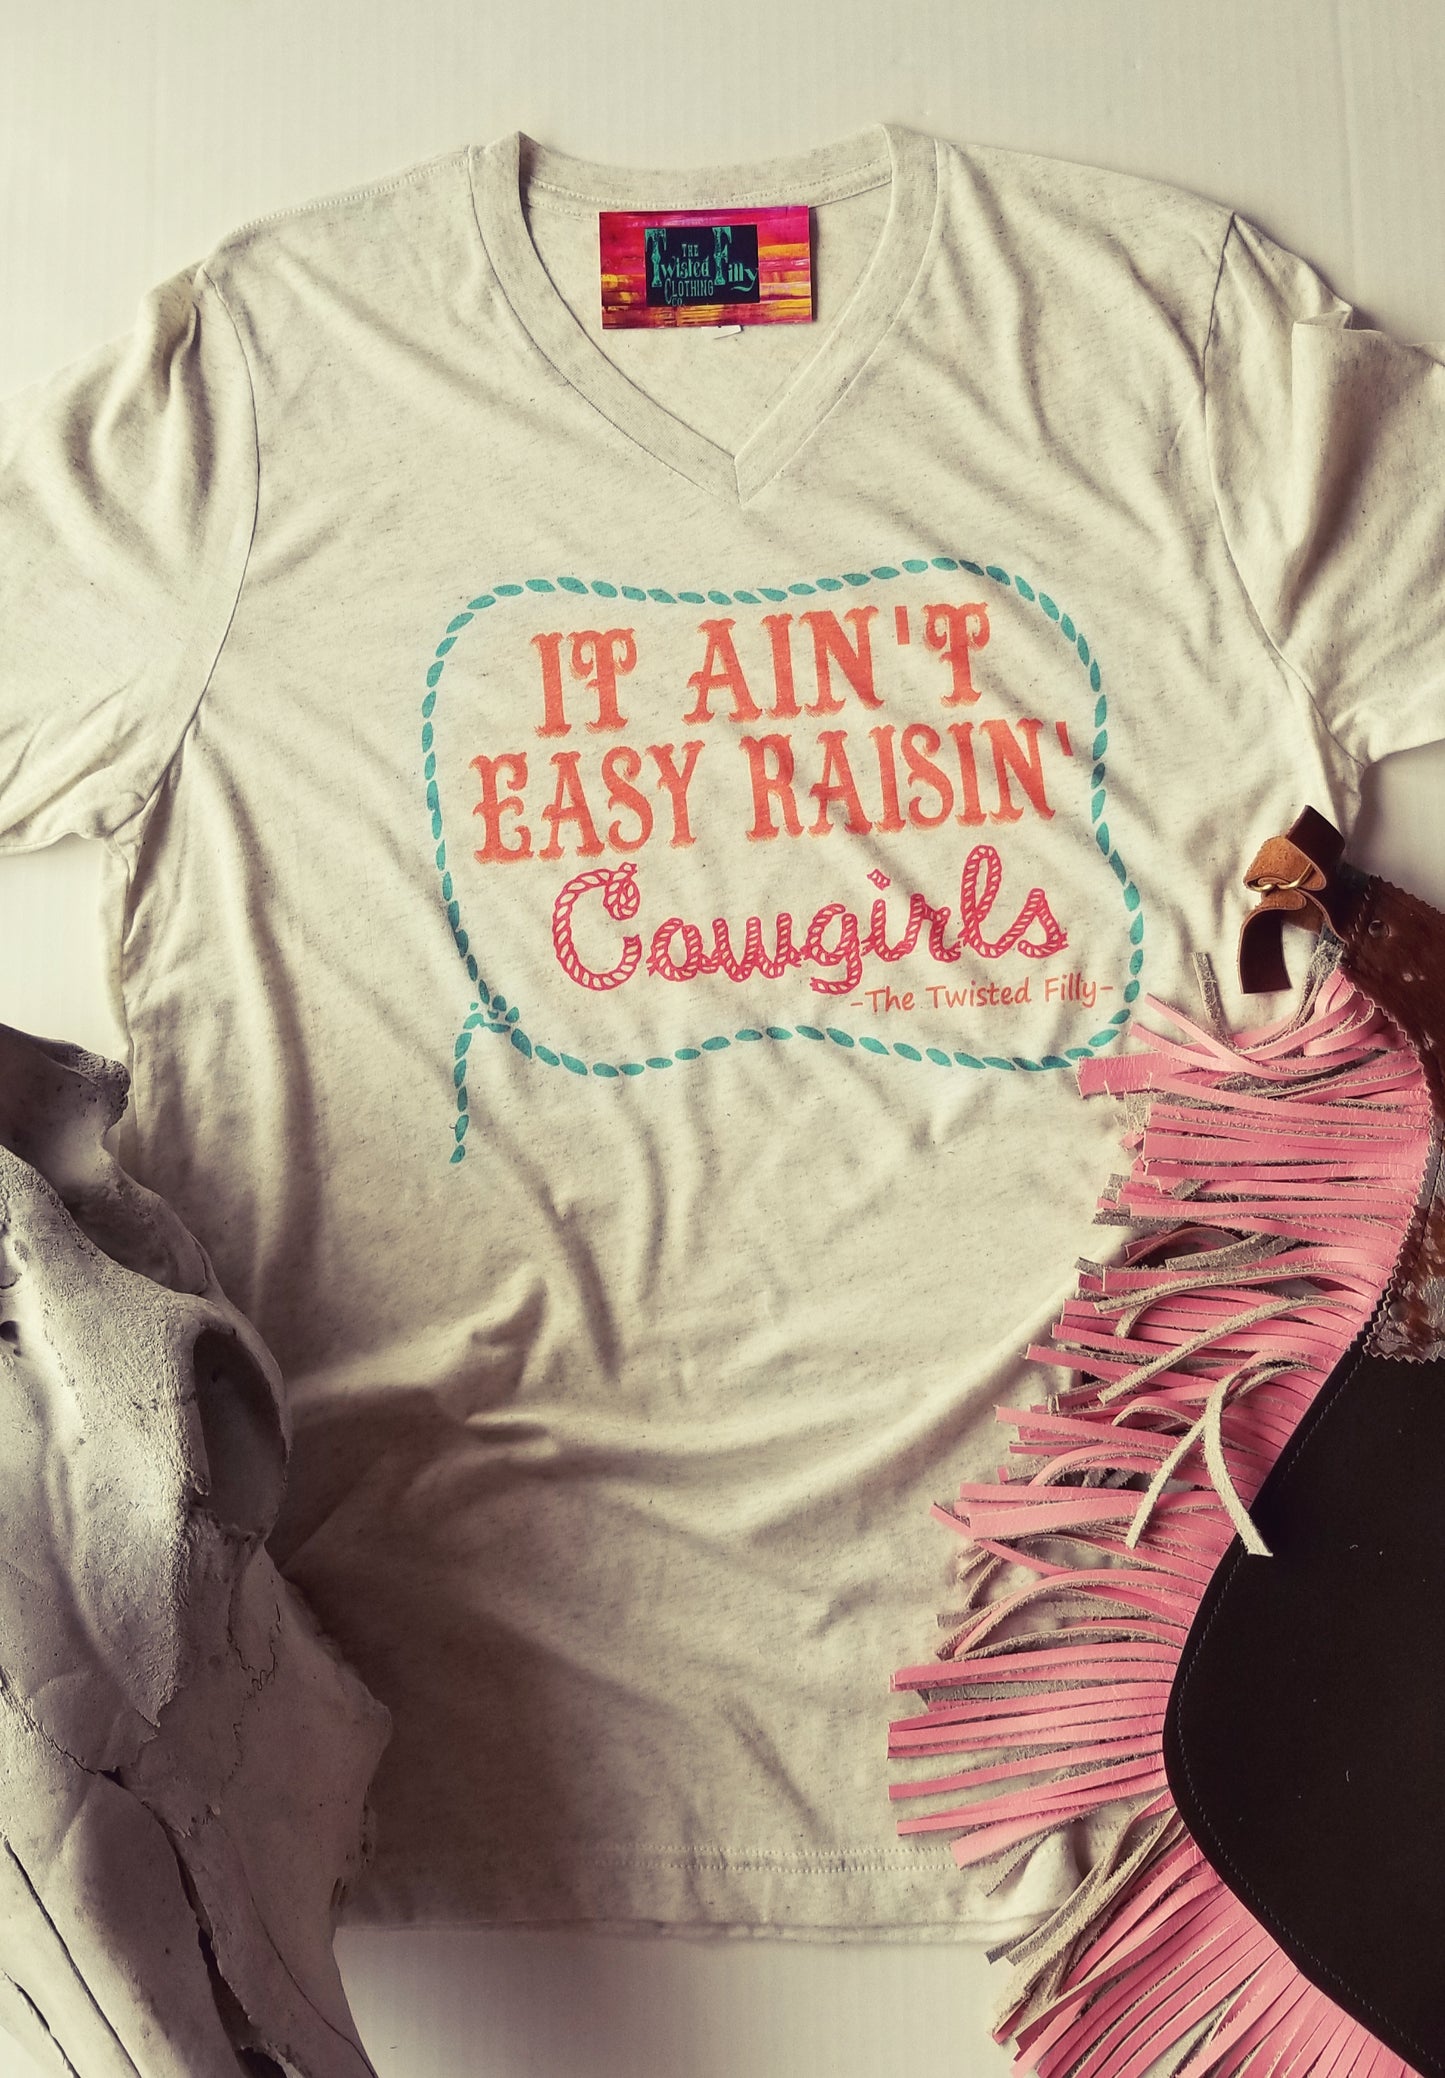 It Ain't Easy Raisin' Cowgirls - S/S Adult V-Neck Tee - Oatmeal